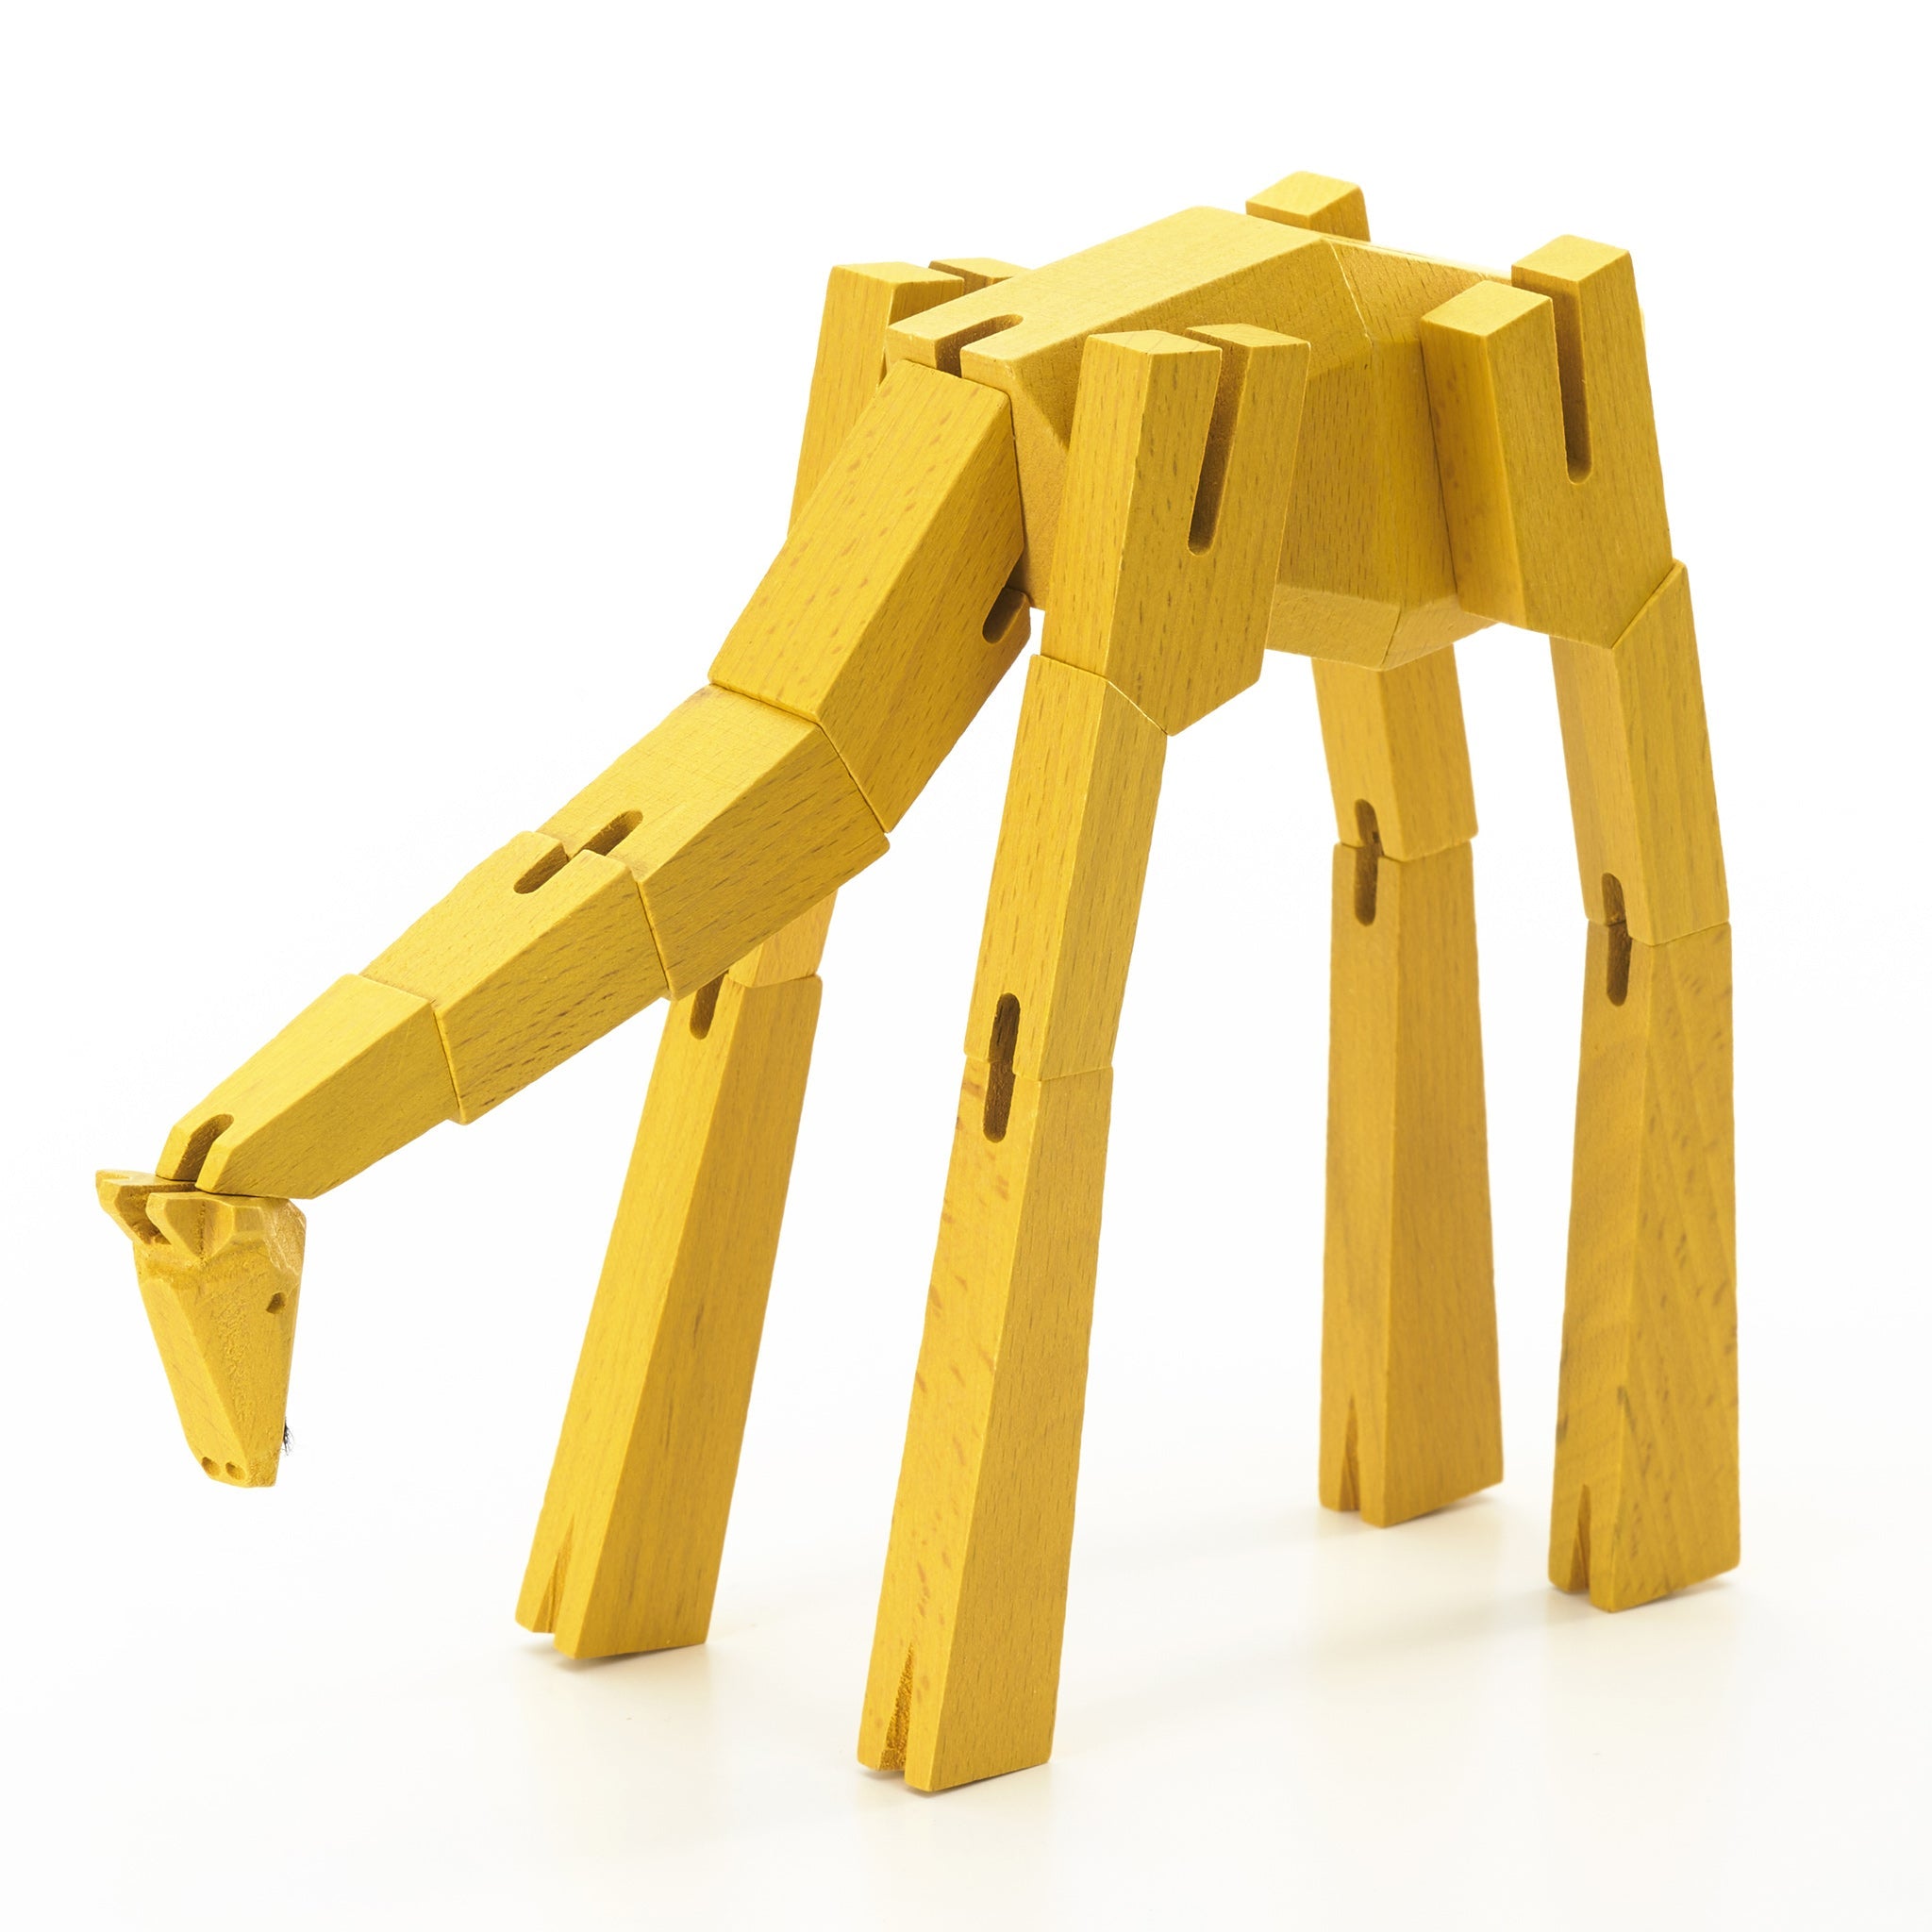 Morphits ® Giraffe Wooden Toy Playset Puzzle Yellow Neck down